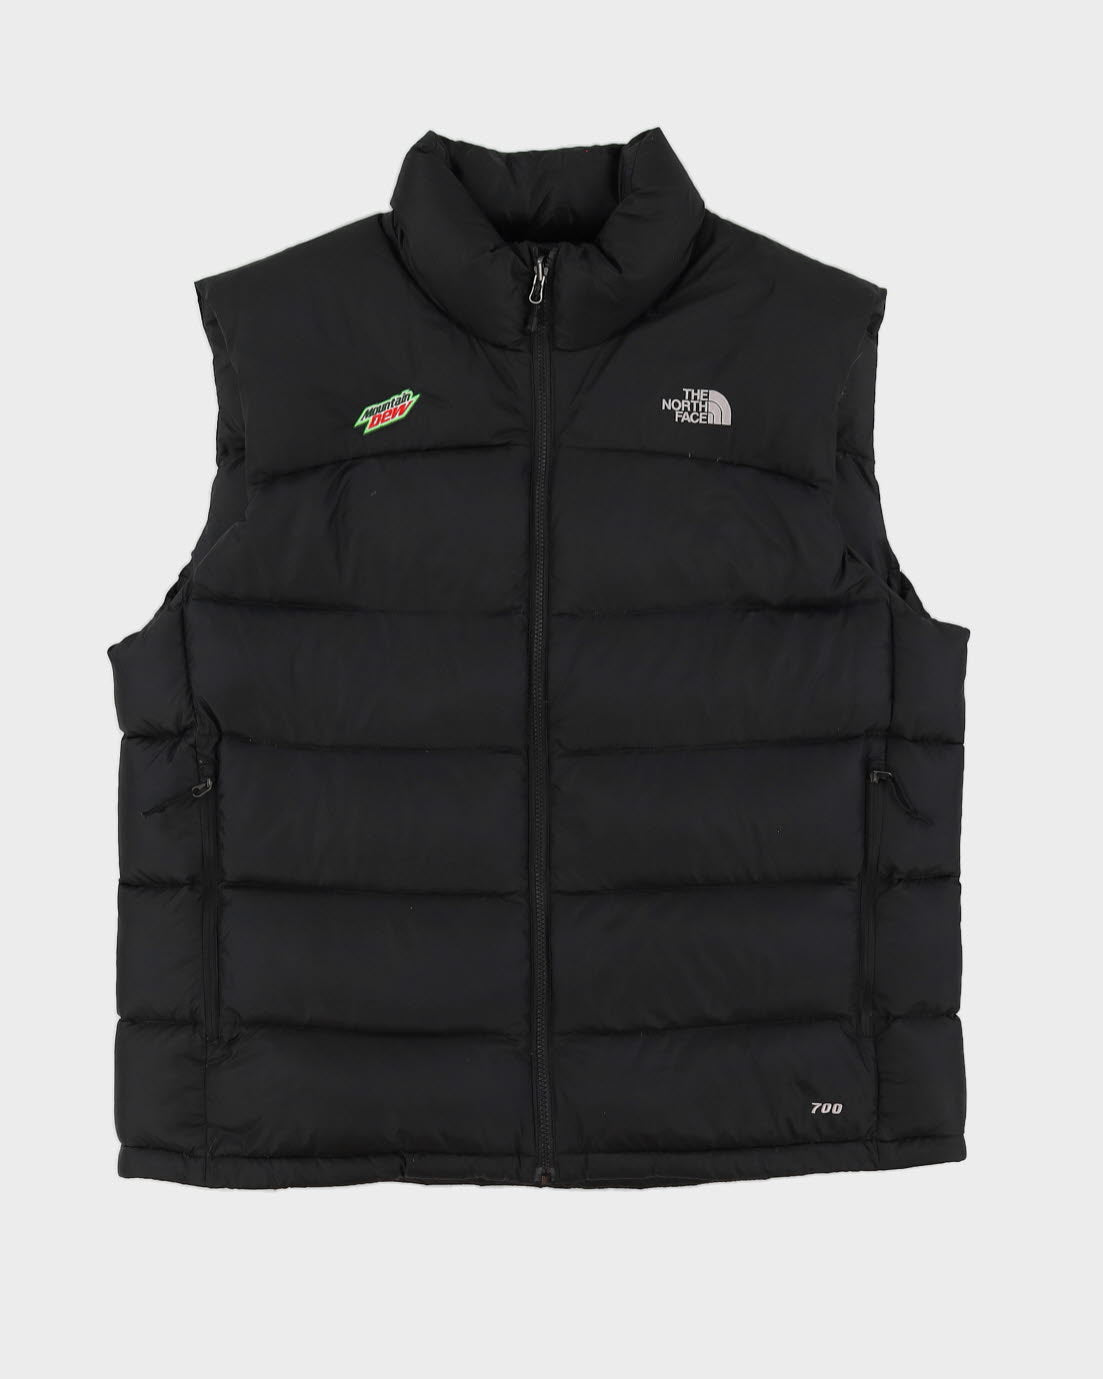 00s The North Face 700 Mountain Dew Black Puffer Gilet - XL